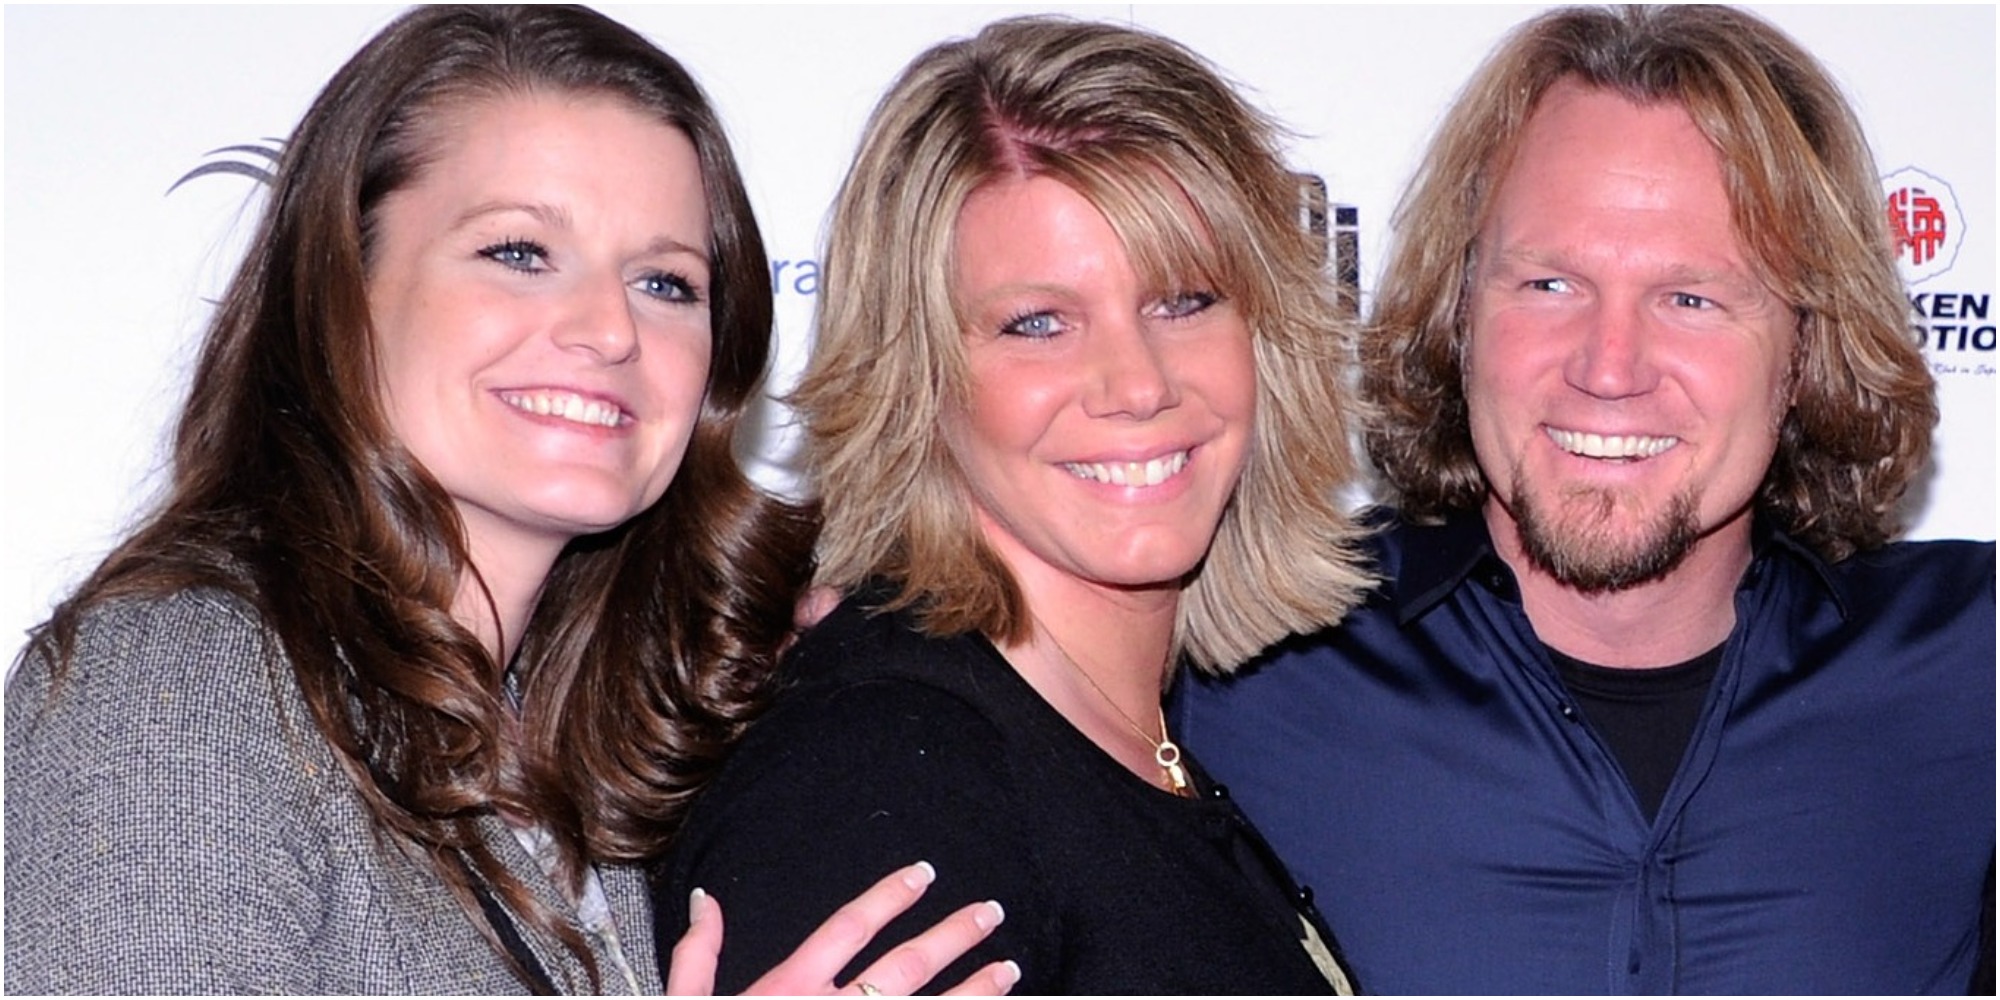 Robyn, Meri and Kody Brown pose at a red carpet event.